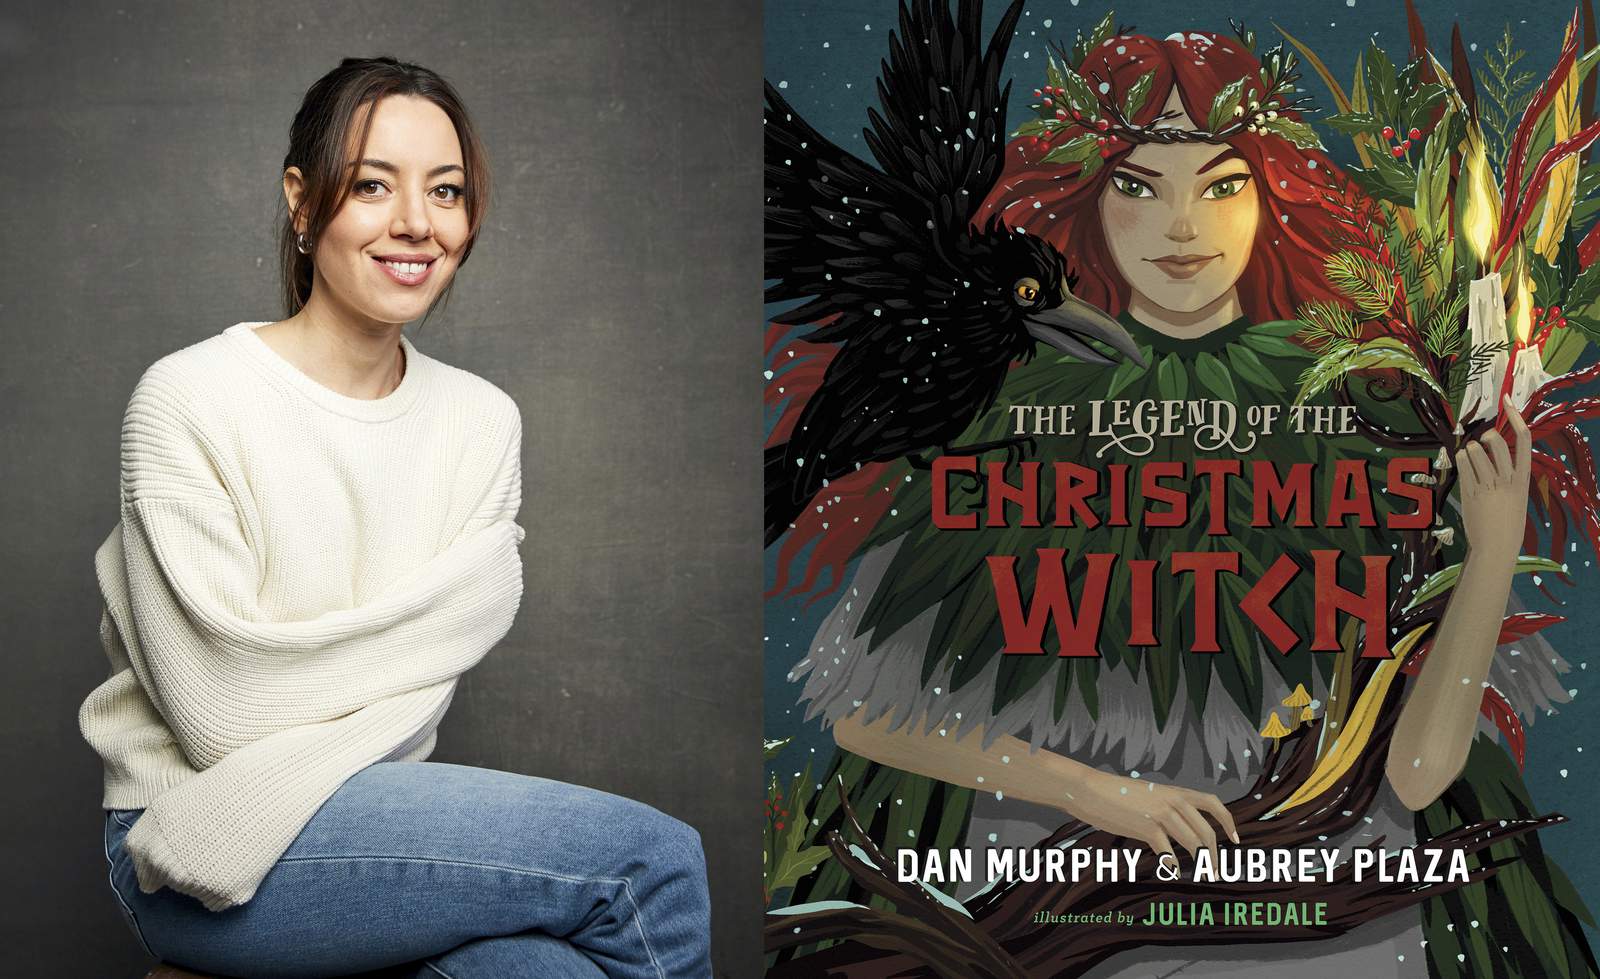 Aubrey Plaza book tells all _ about Santa Claus’ sister